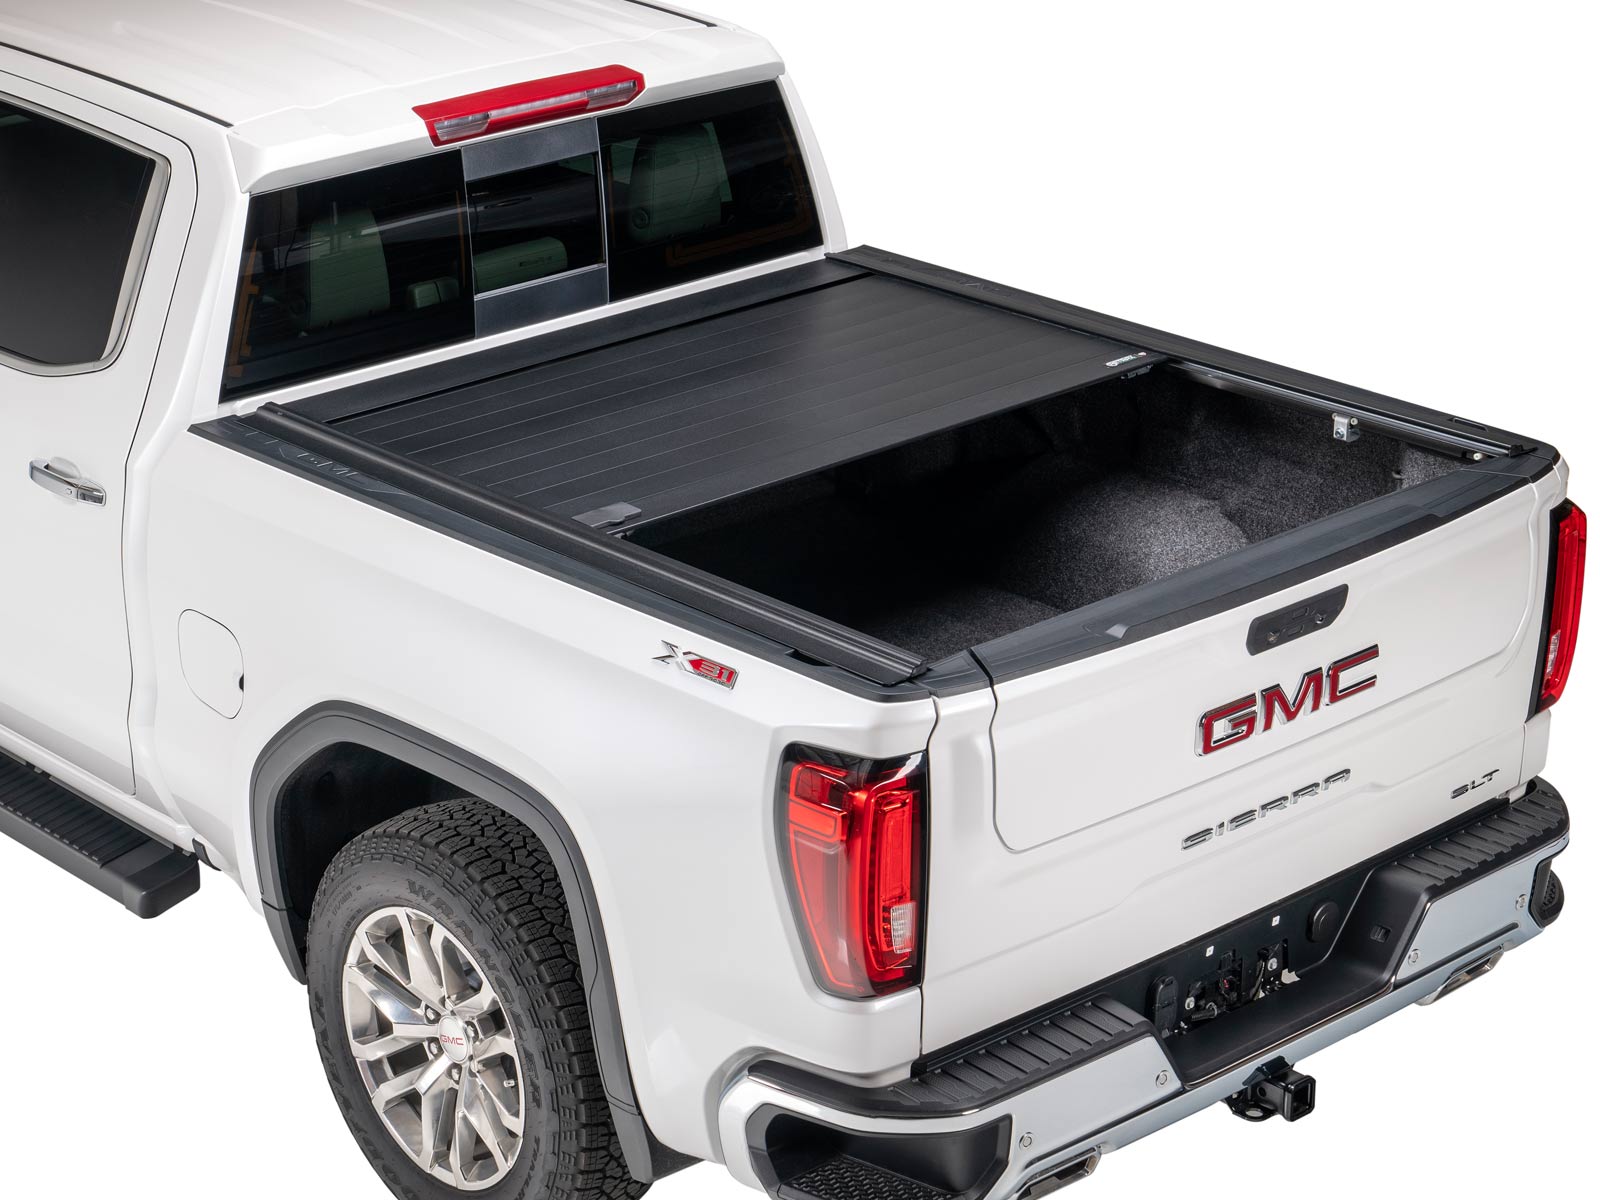 Truck Bed Covers & Tonneau Covers | RealTruck